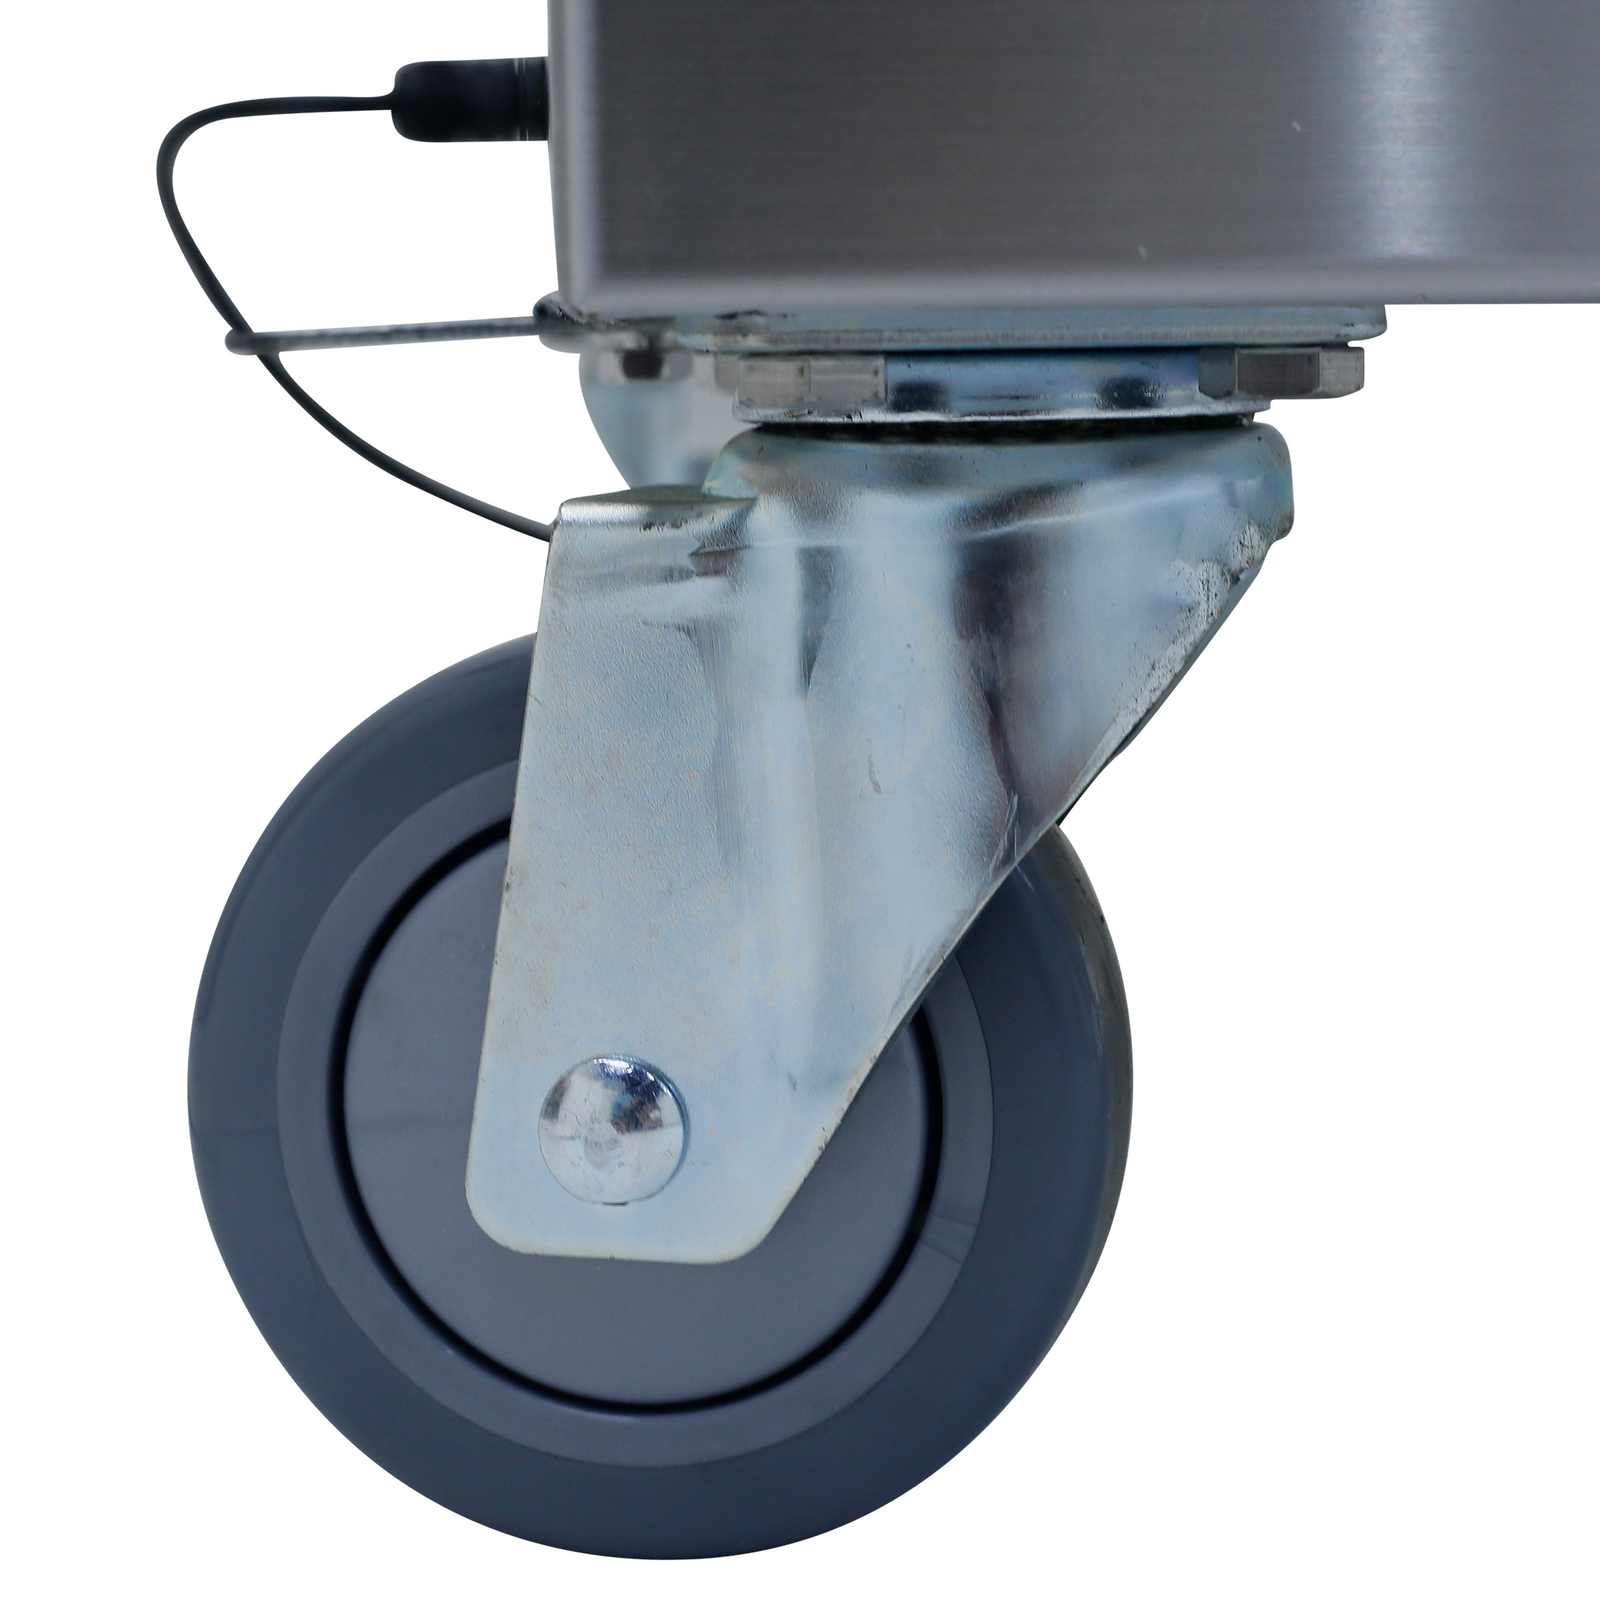 One of the wheels of the JORES TECHNOLOGIES® commercial single chamber vacuum sealer